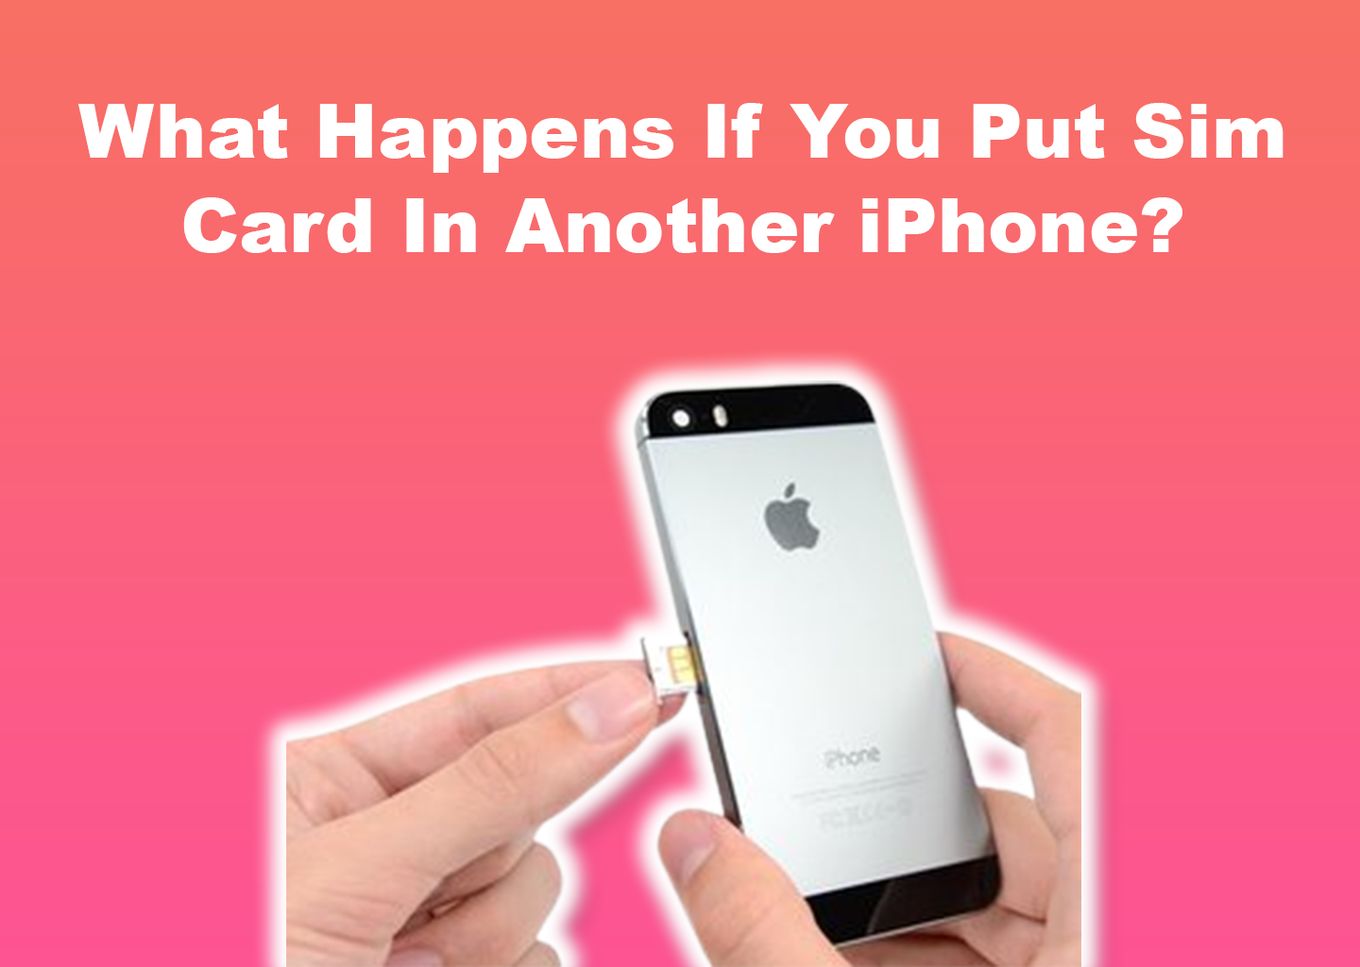 What Happens If You Put SIM Card In Another iPhone